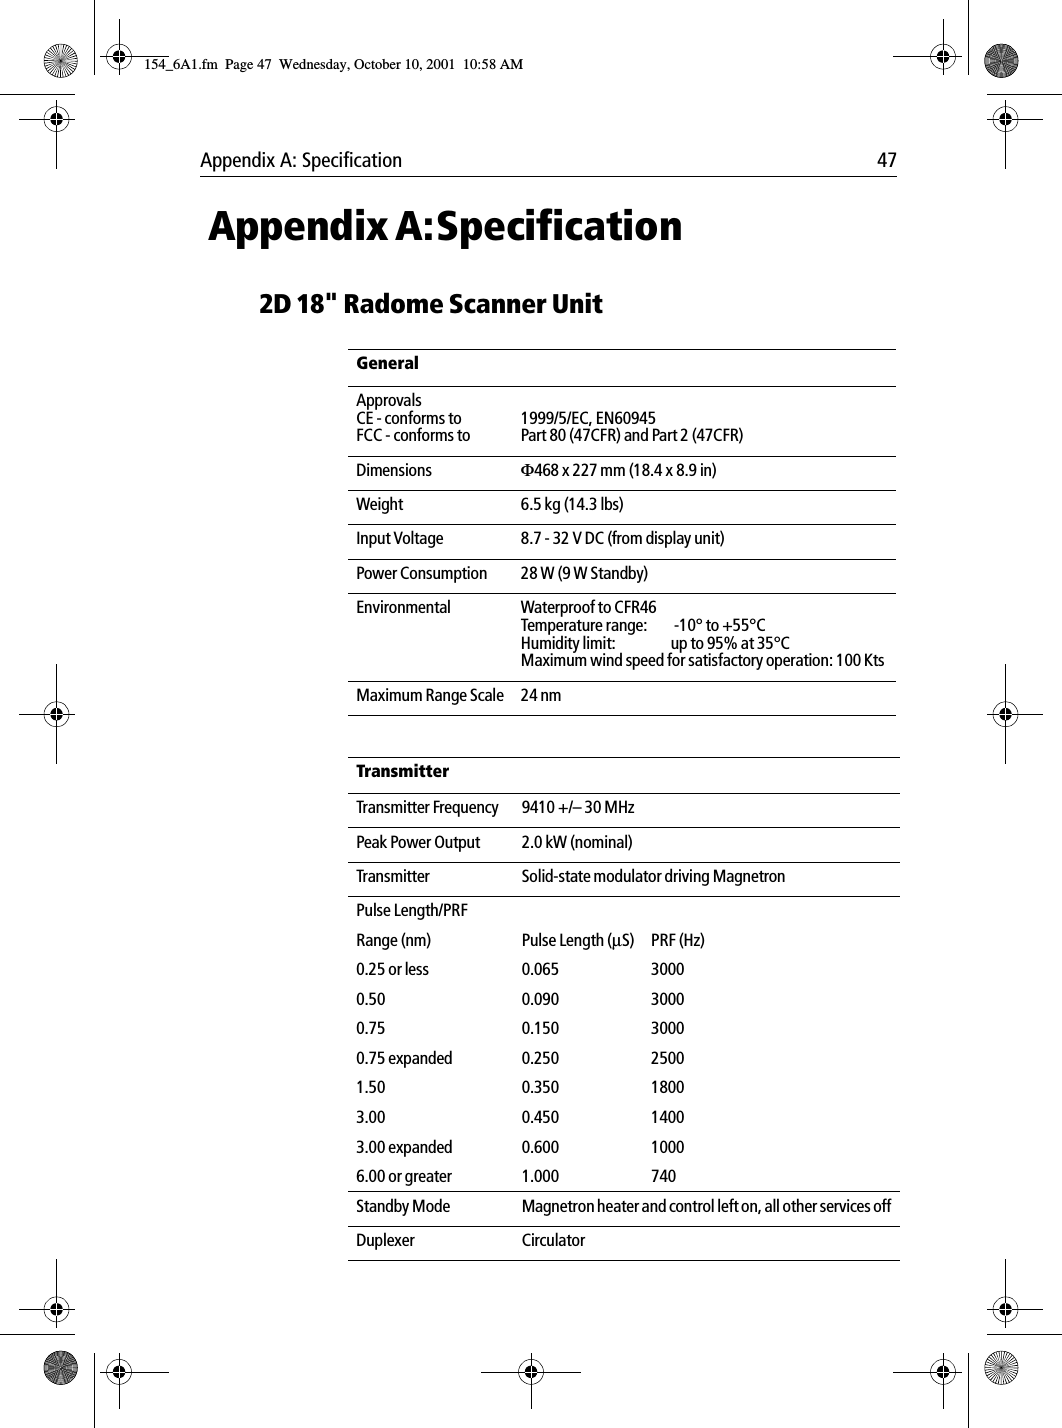 Appendix A: Specification 47 Appendix A:Specification2D 18&quot; Radome Scanner Unit GeneralApprovalsCE - conforms toFCC - conforms to1999/5/EC, EN60945Part 80 (47CFR) and Part 2 (47CFR)Dimensions Φ468 x 227 mm (18.4 x 8.9 in)Weight 6.5 kg (14.3 lbs)Input Voltage  8.7 - 32 V DC (from display unit)Power Consumption 28 W (9 W Standby)Environmental Waterproof to CFR46Temperature range:  -10° to +55°CHumidity limit: up to 95% at 35°C Maximum wind speed for satisfactory operation: 100 Kts Maximum Range Scale 24 nmTransmitterTransmitter Frequency 9410 +/– 30 MHzPeak Power Output 2.0 kW (nominal)Transmitter Solid-state modulator driving MagnetronPulse Length/PRFRange (nm) Pulse Length (µS) PRF (Hz)0.25 or less 0.065 30000.50 0.090 30000.75 0.150 30000.75 expanded 0.250 25001.50 0.350 18003.00 0.450 14003.00 expanded 0.600 10006.00 or greater 1.000 740Standby Mode Magnetron heater and control left on, all other services offDuplexer Circulator154_6A1.fm  Page 47  Wednesday, October 10, 2001  10:58 AM